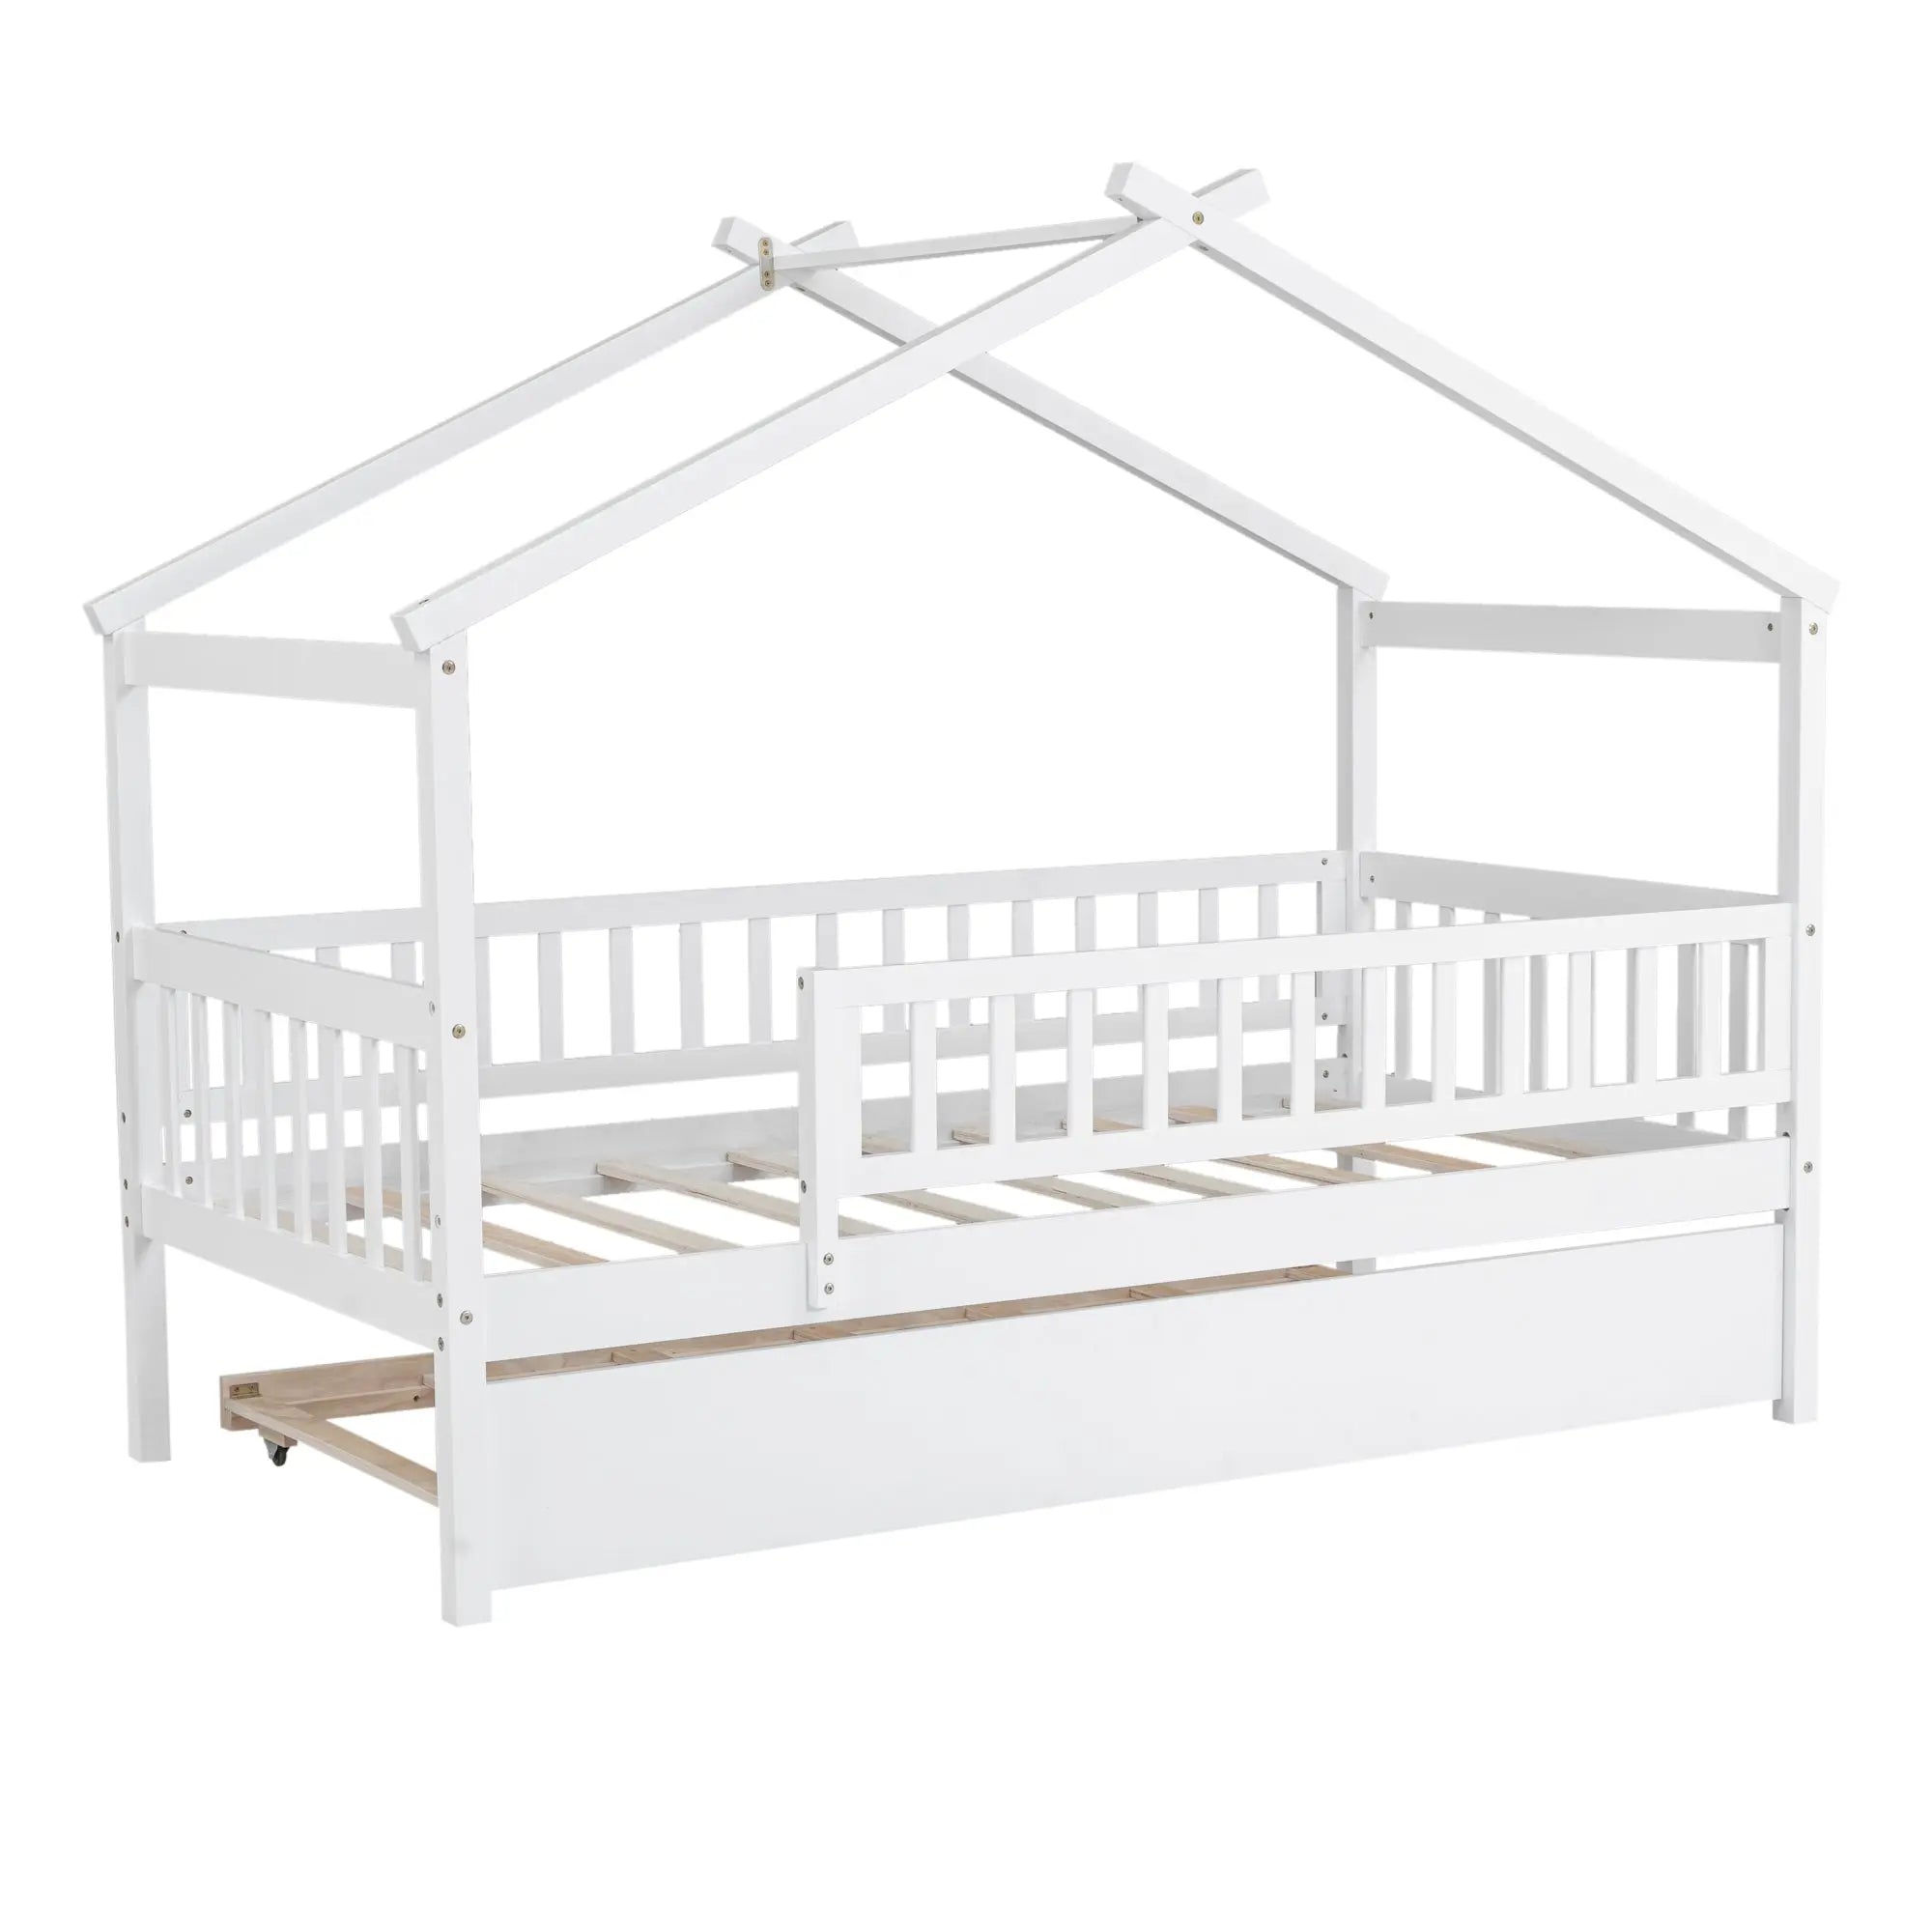 Bellemave® Wooden House Bed with Trundle Bed